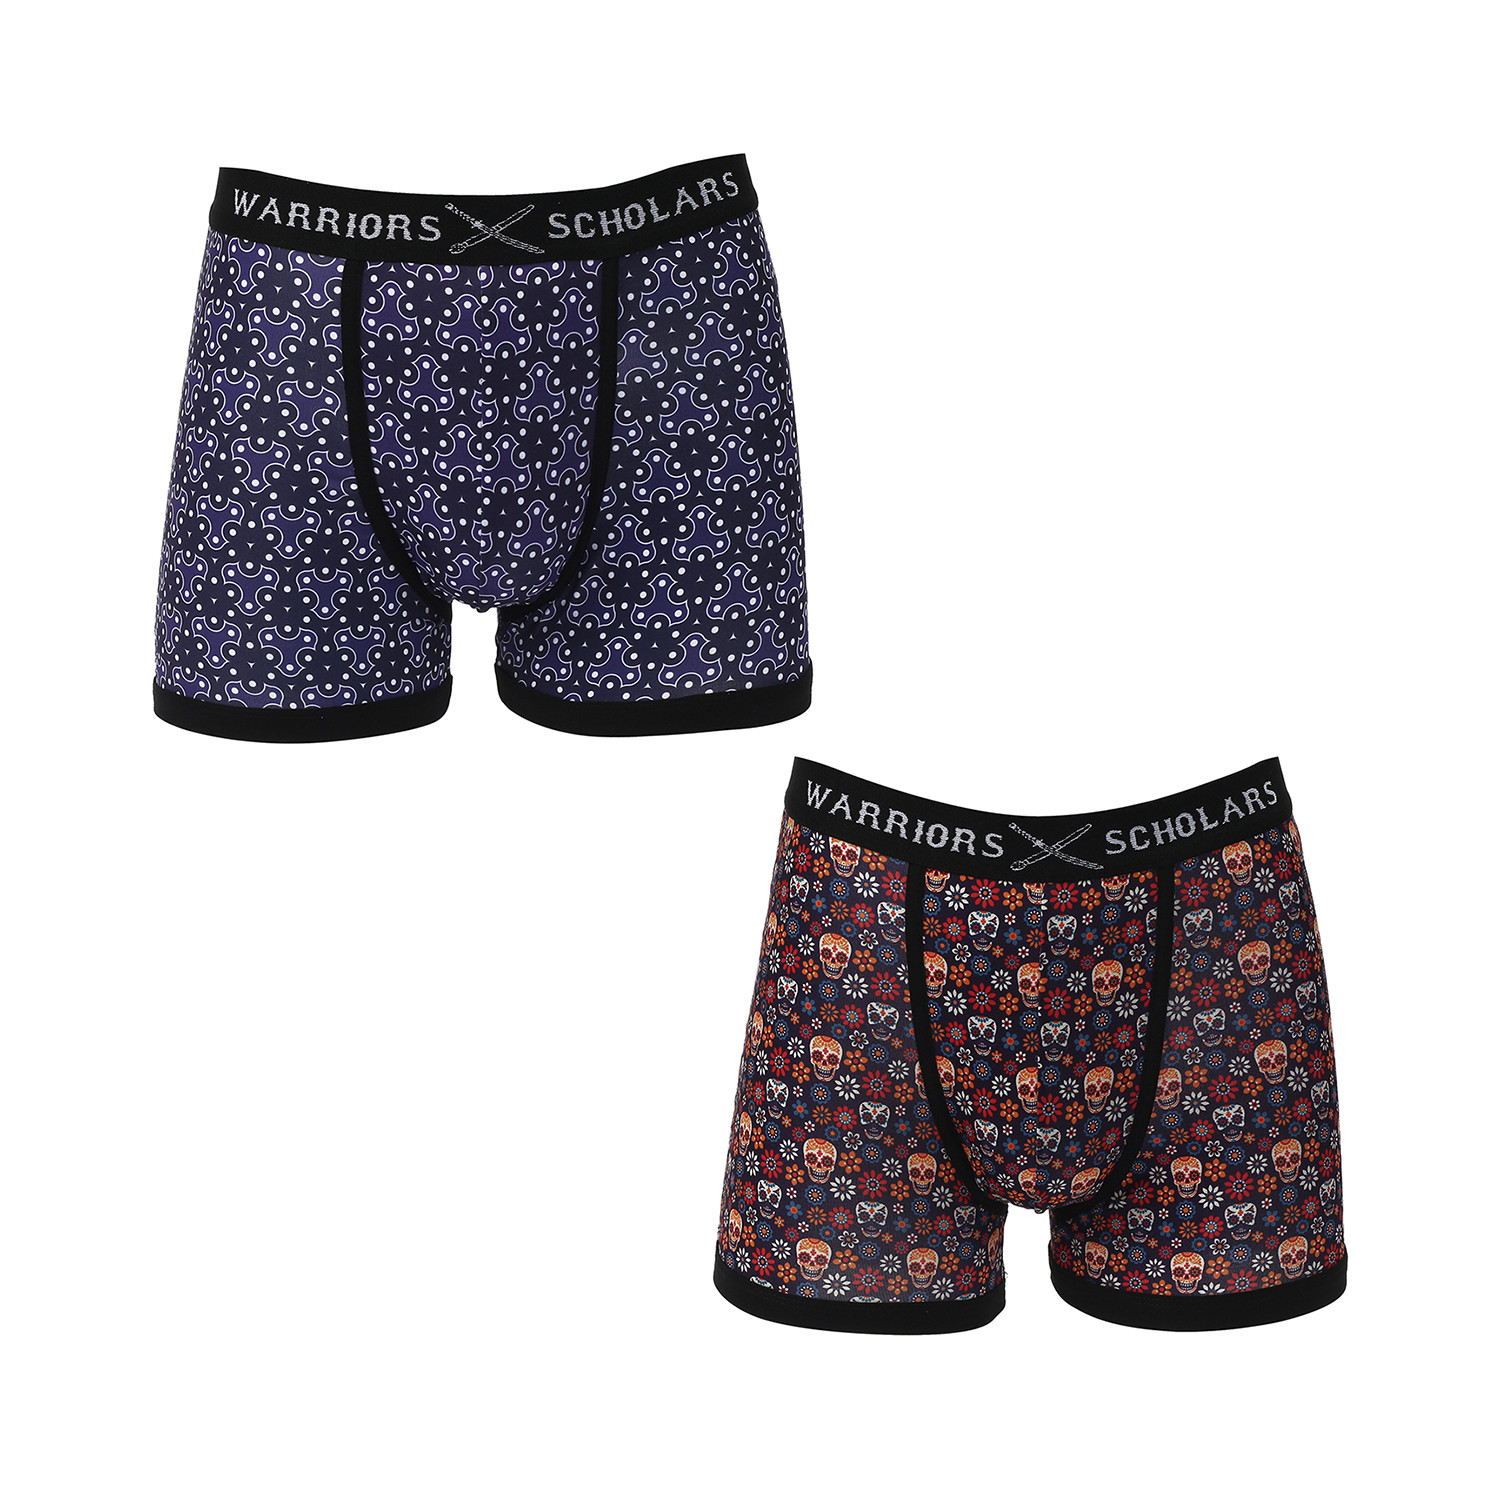 Ethan Moisture Wicking Boxer Brief // Blue // Pack of 2 (L) - Warriors ...